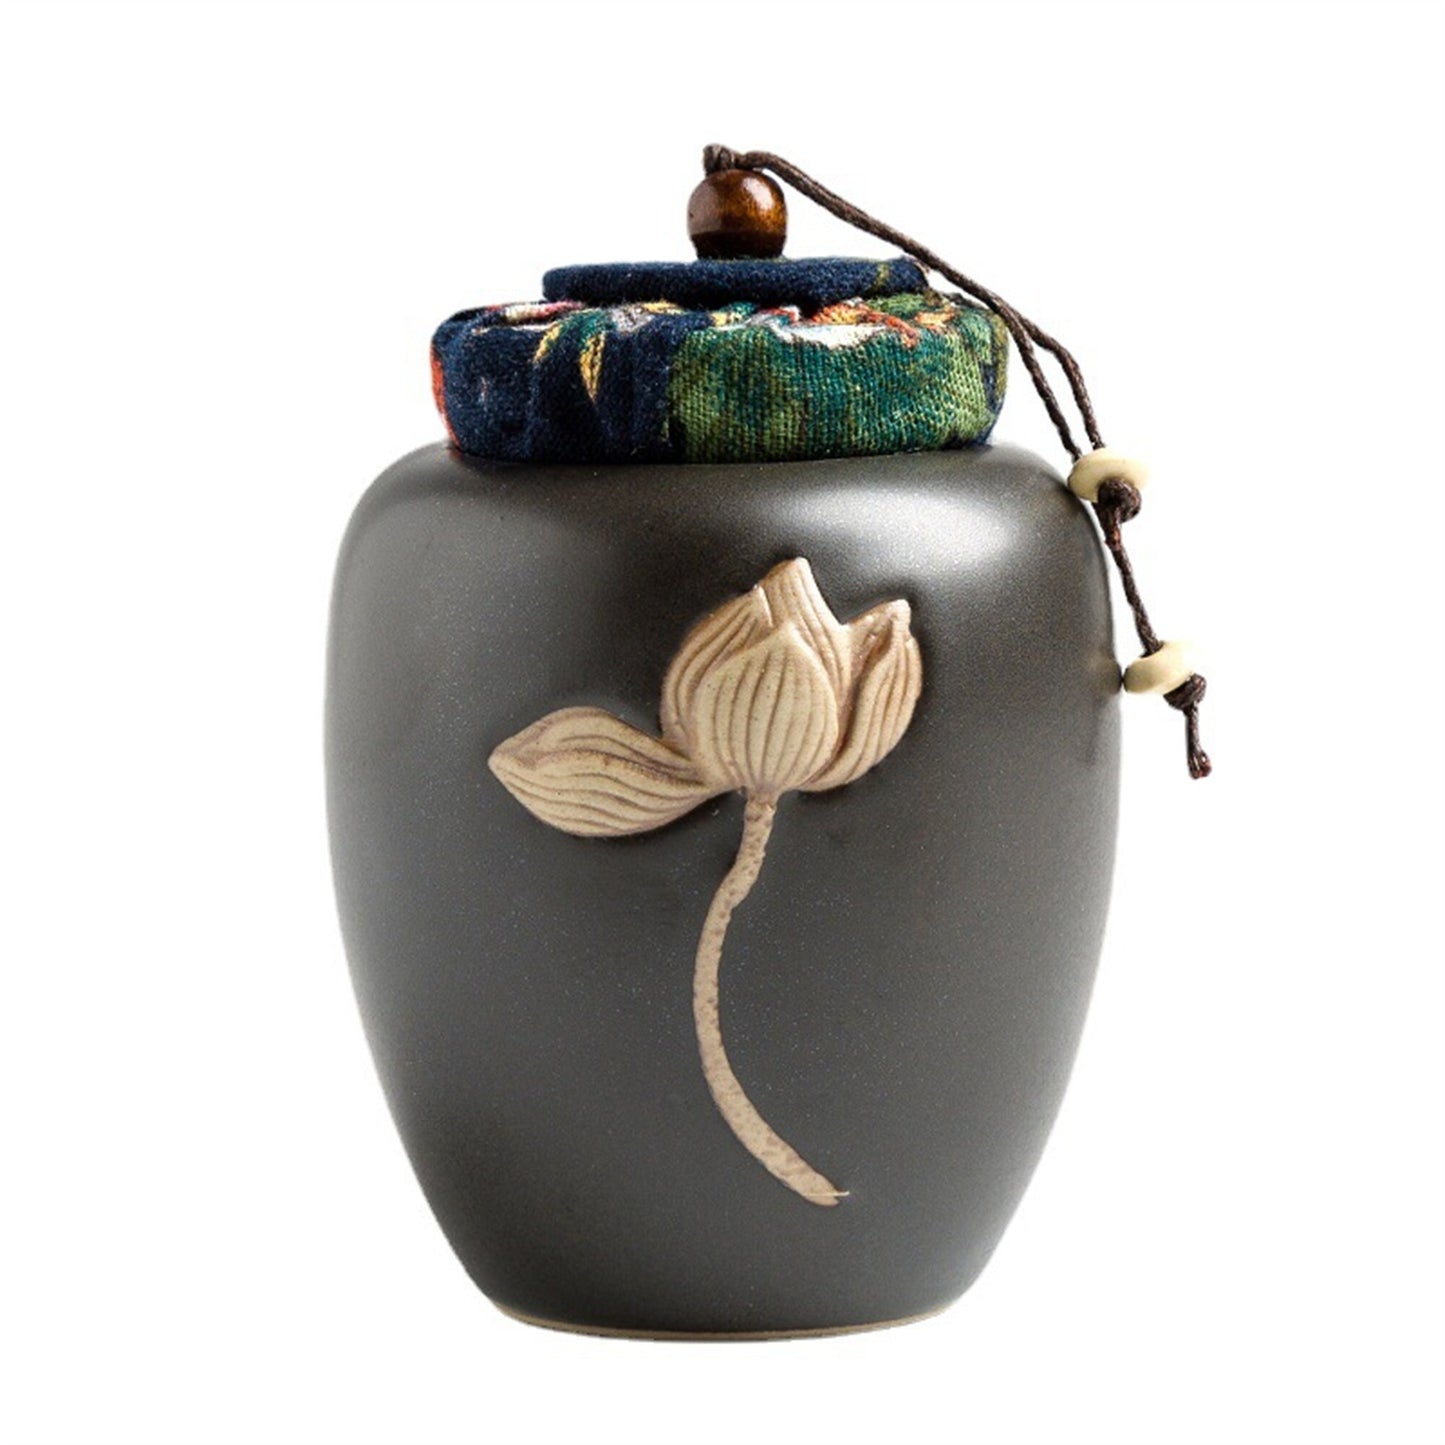 Pottery Sealed Tea/Coffee Container With Lid - Relief Lotus Ceramic Tea  Canister Container - Ceramic Tea Loose Leaf Storage Sugar Canister